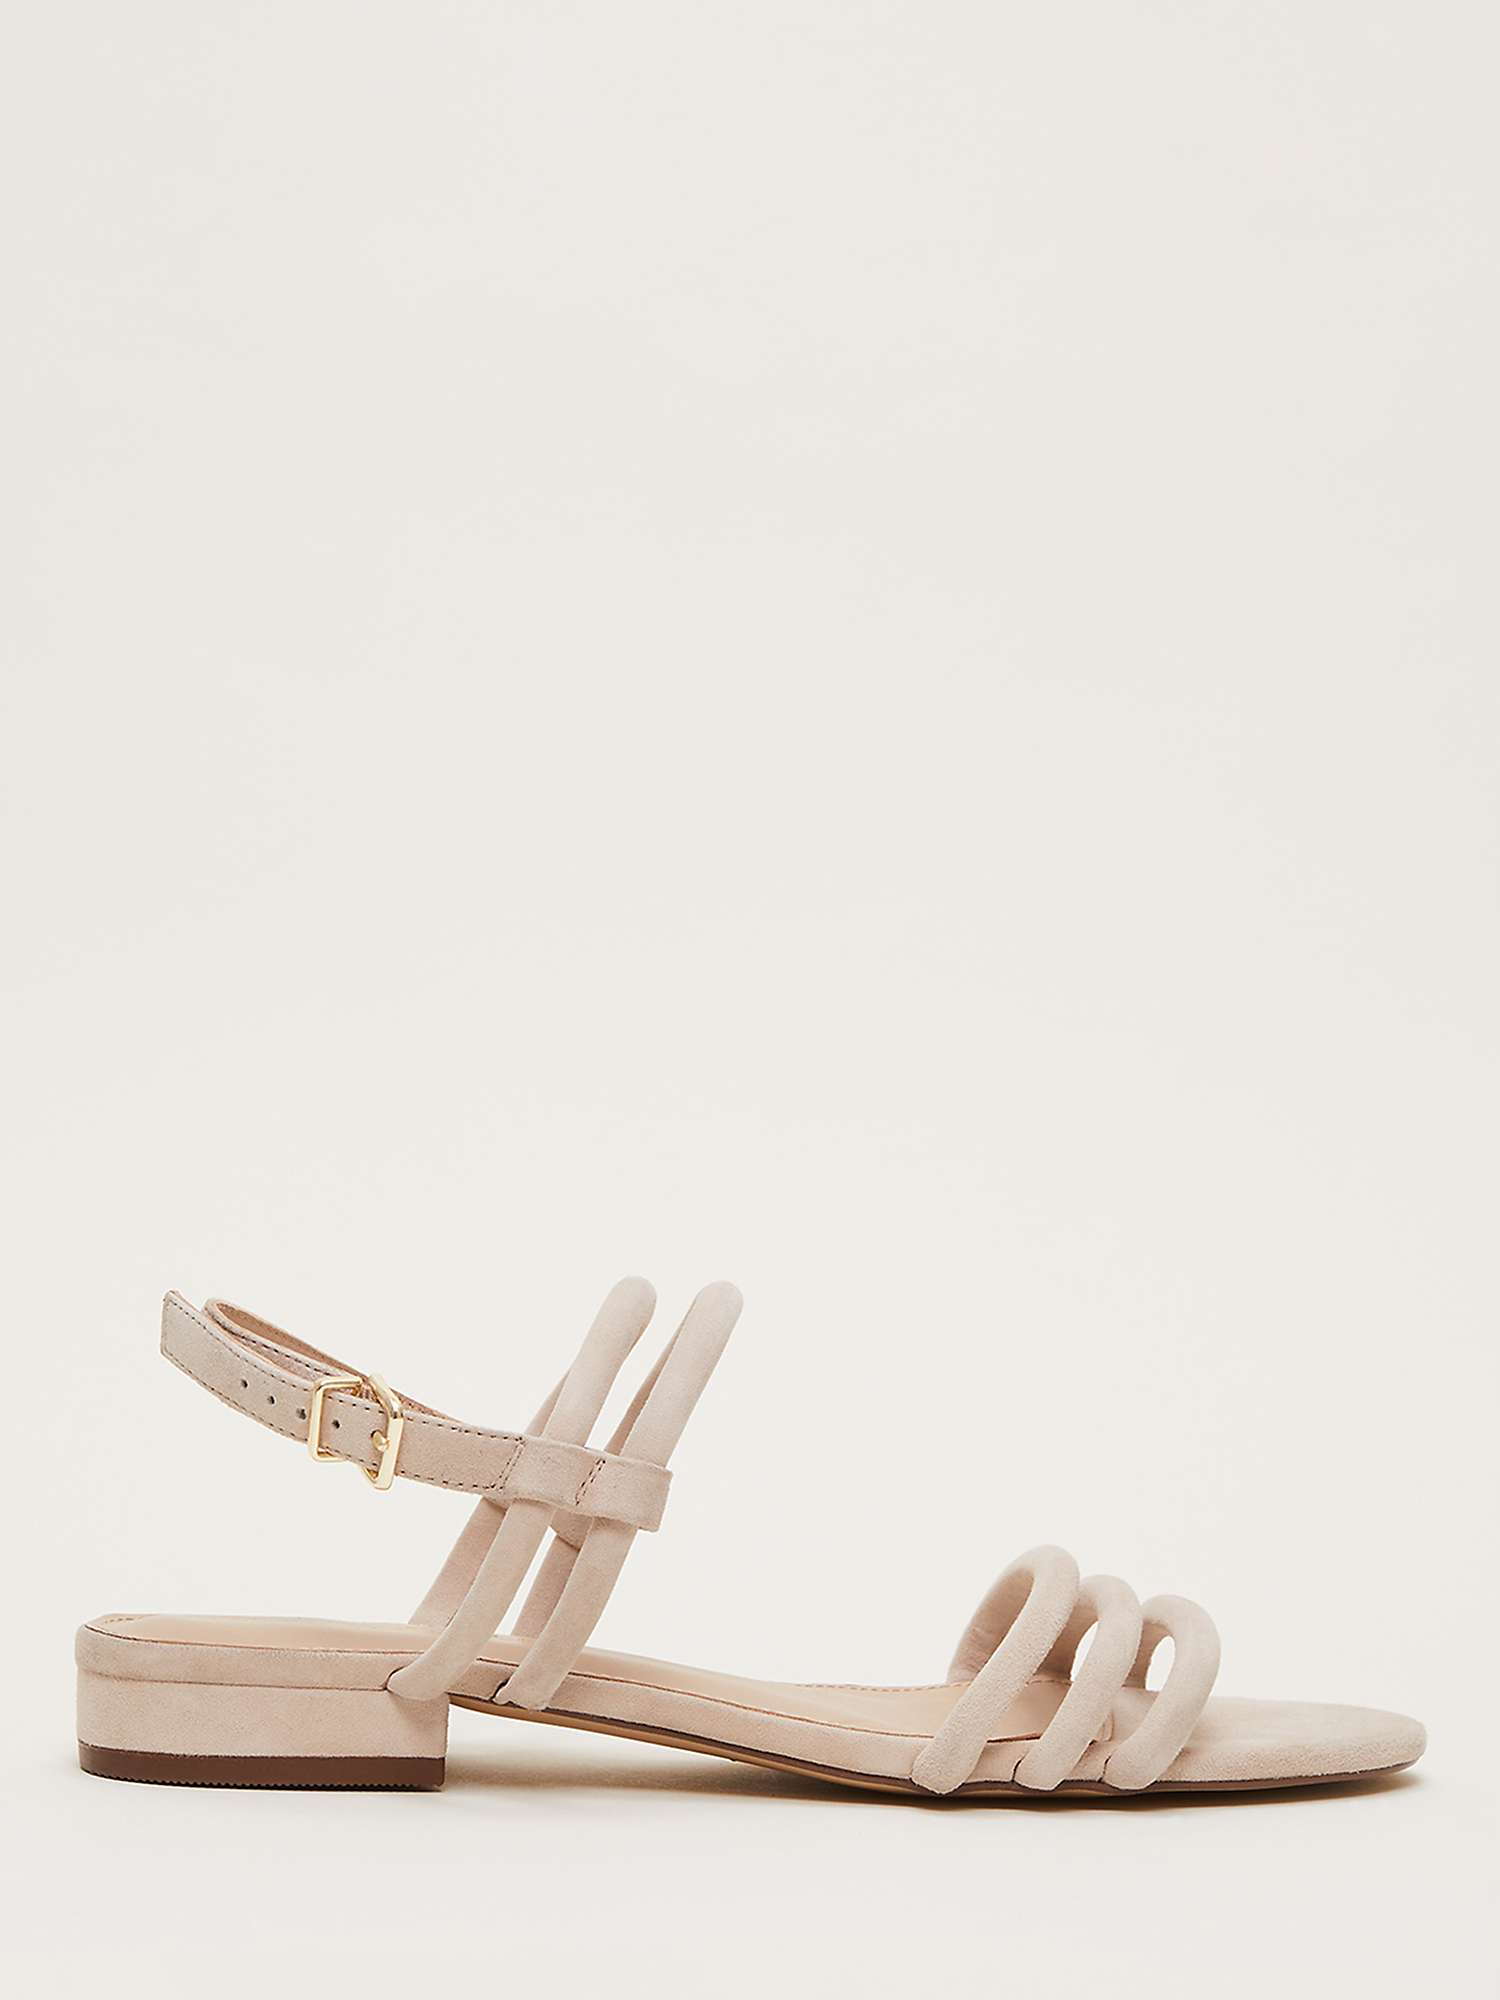 Buy Phase Eight Suede Strap Sandals, Neutral Online at johnlewis.com